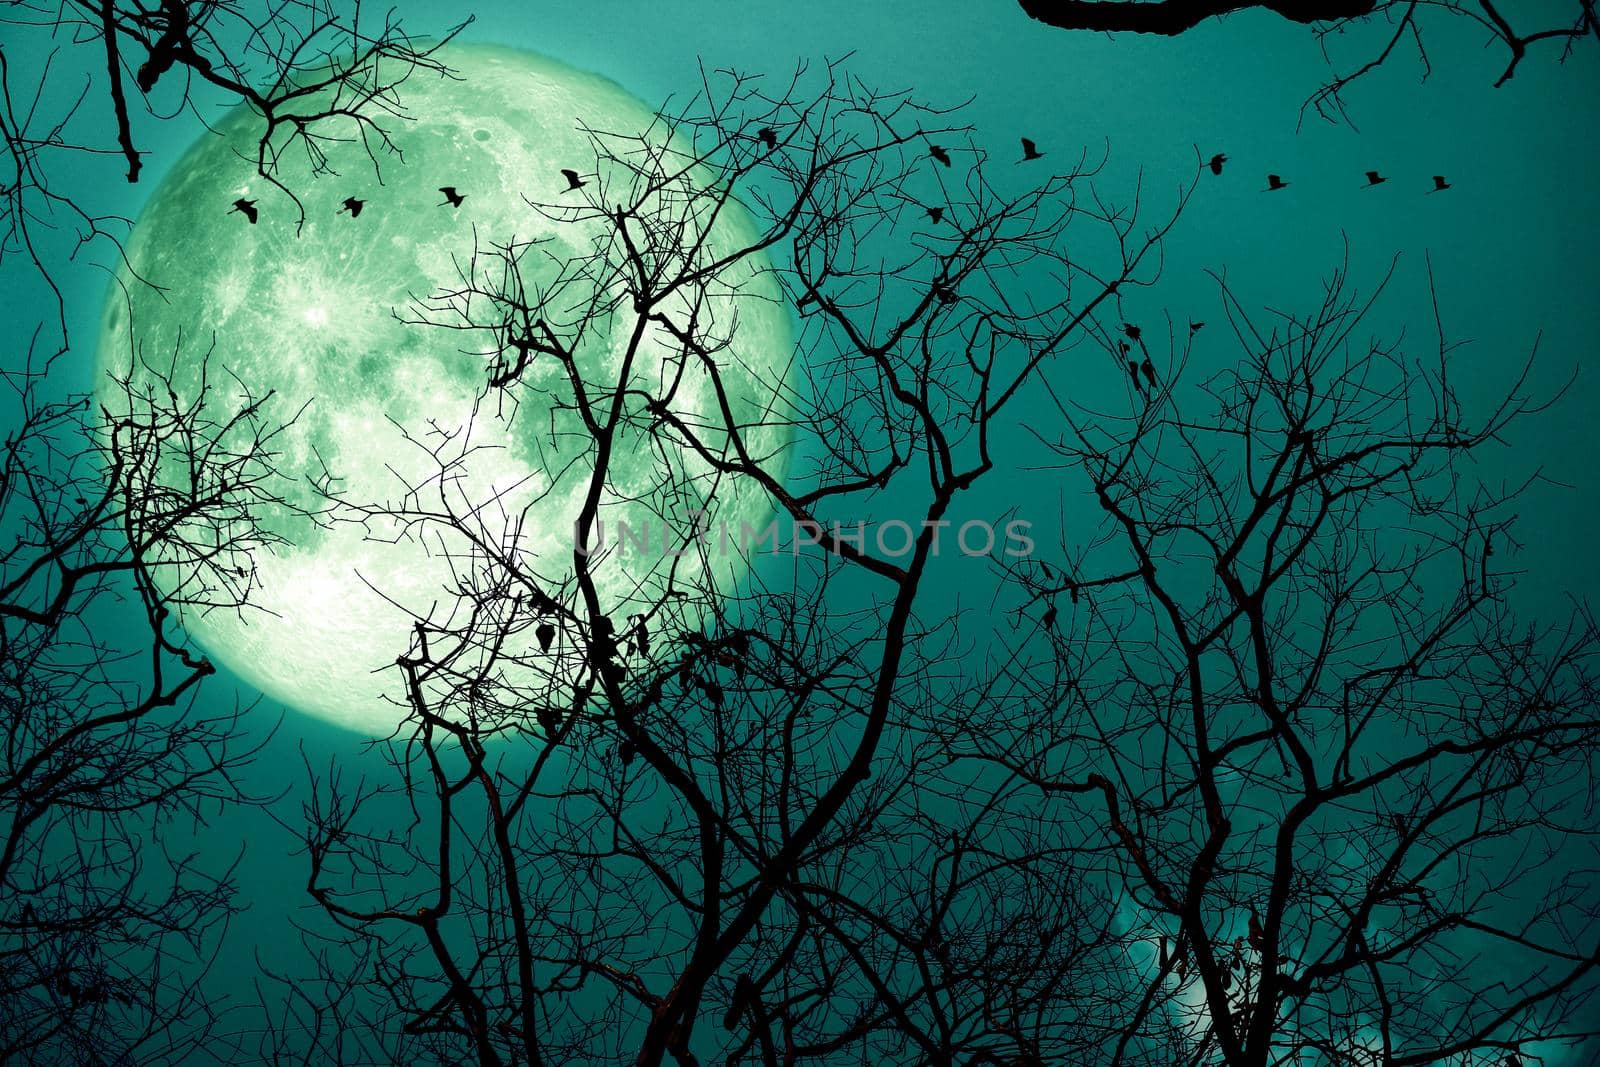 super sturgeon green moon and silhouette birds in the night sky by Darkfox